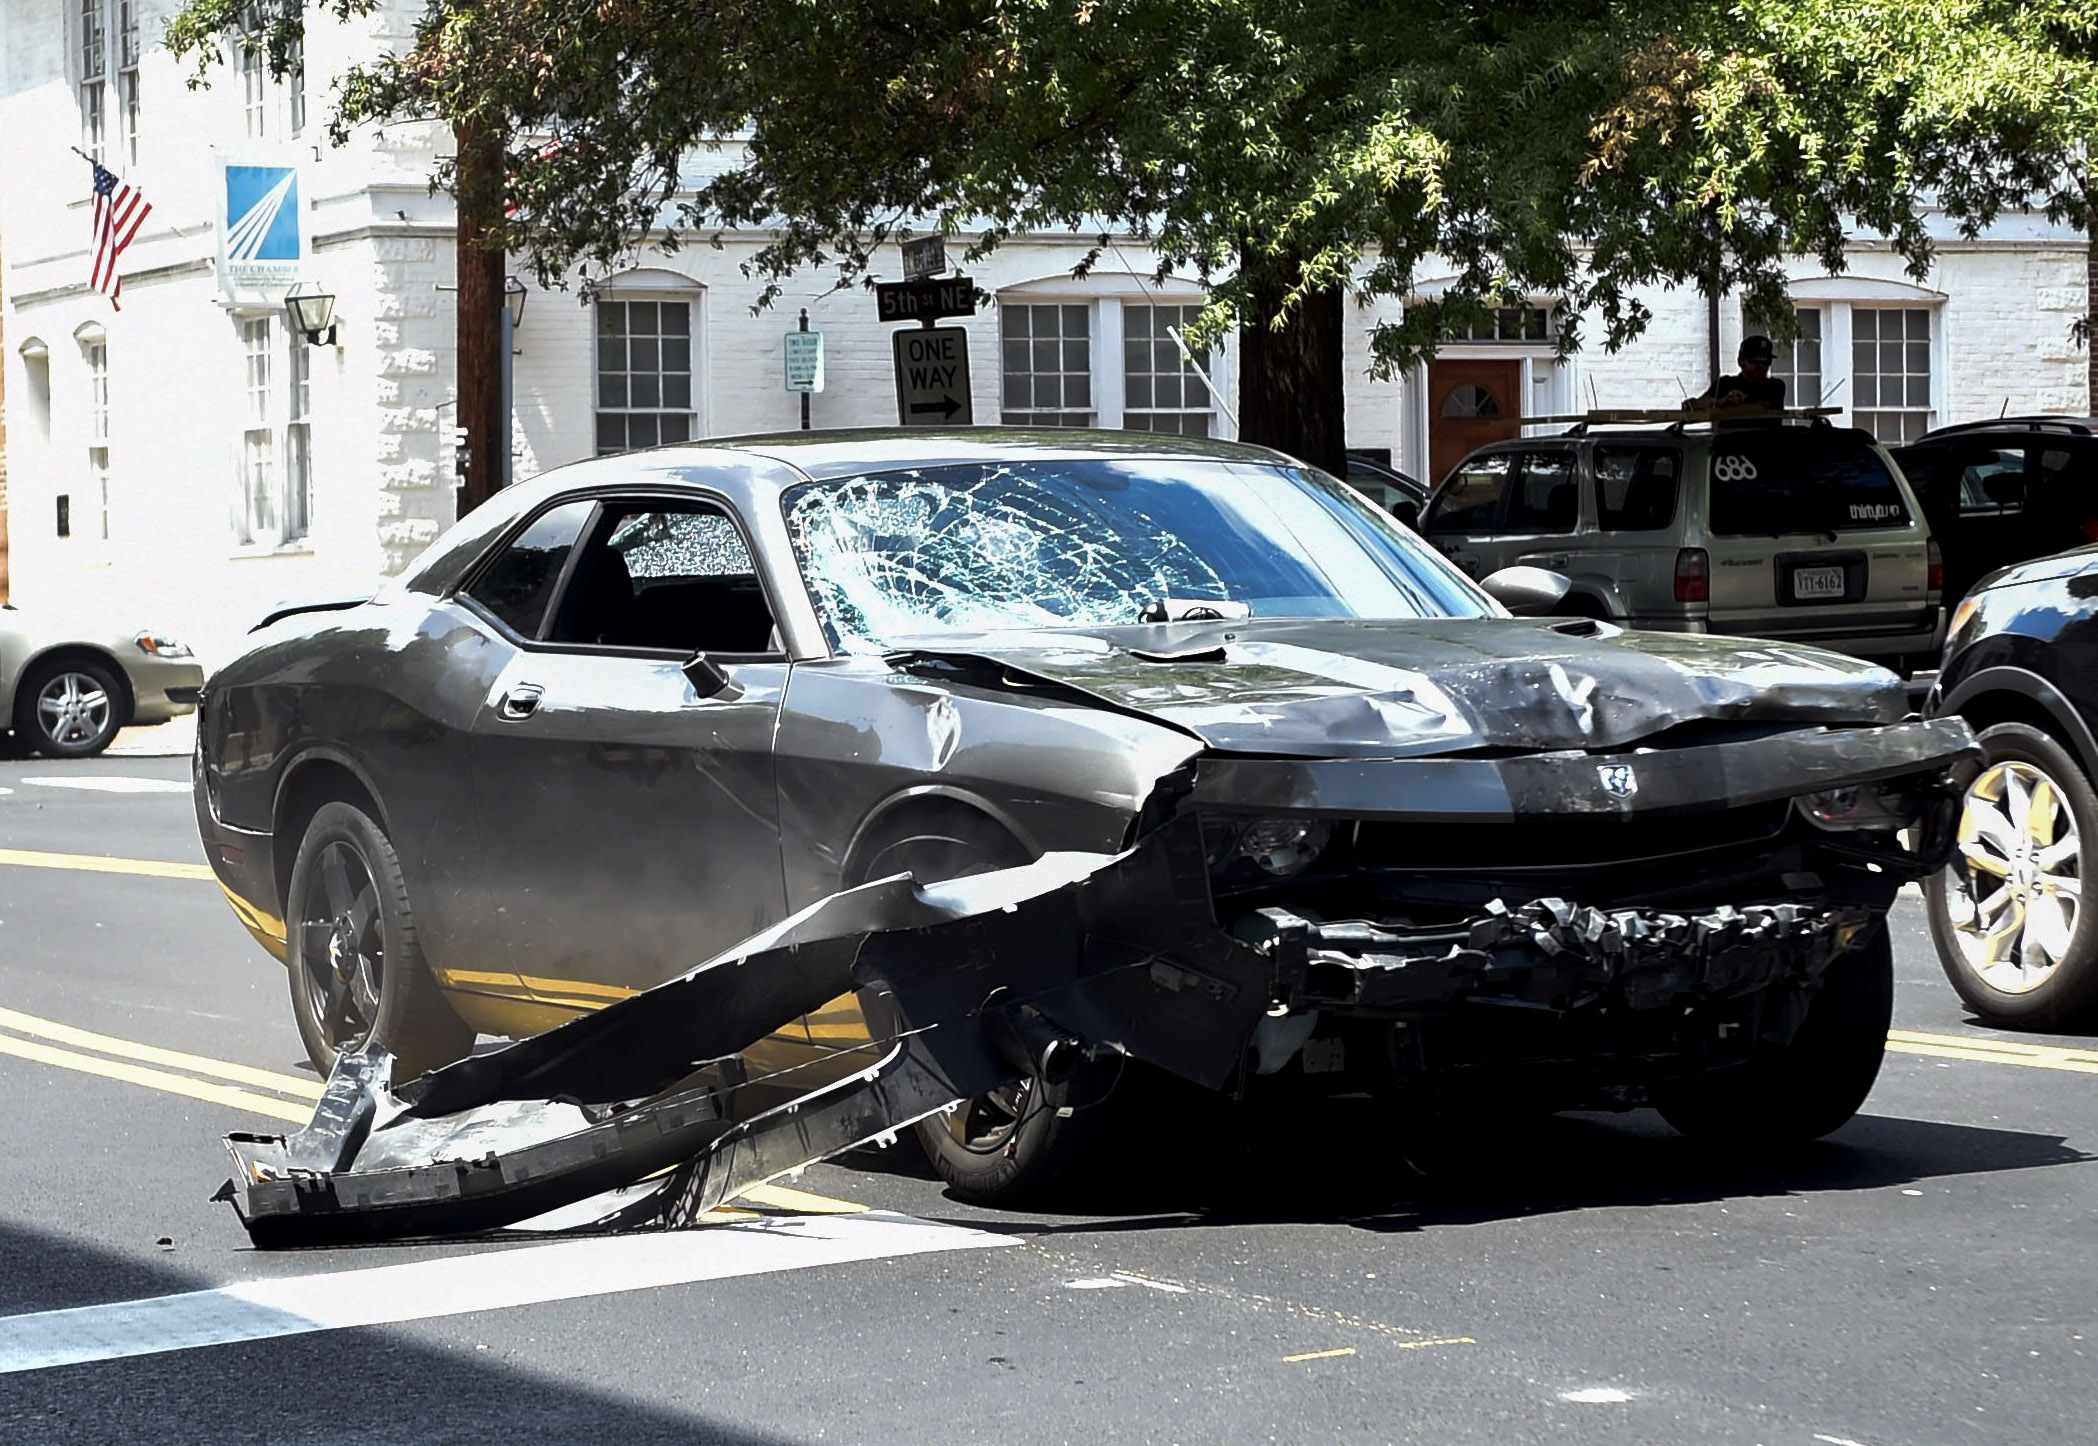 The silver Dodge Charger used to injure a group of protestors.